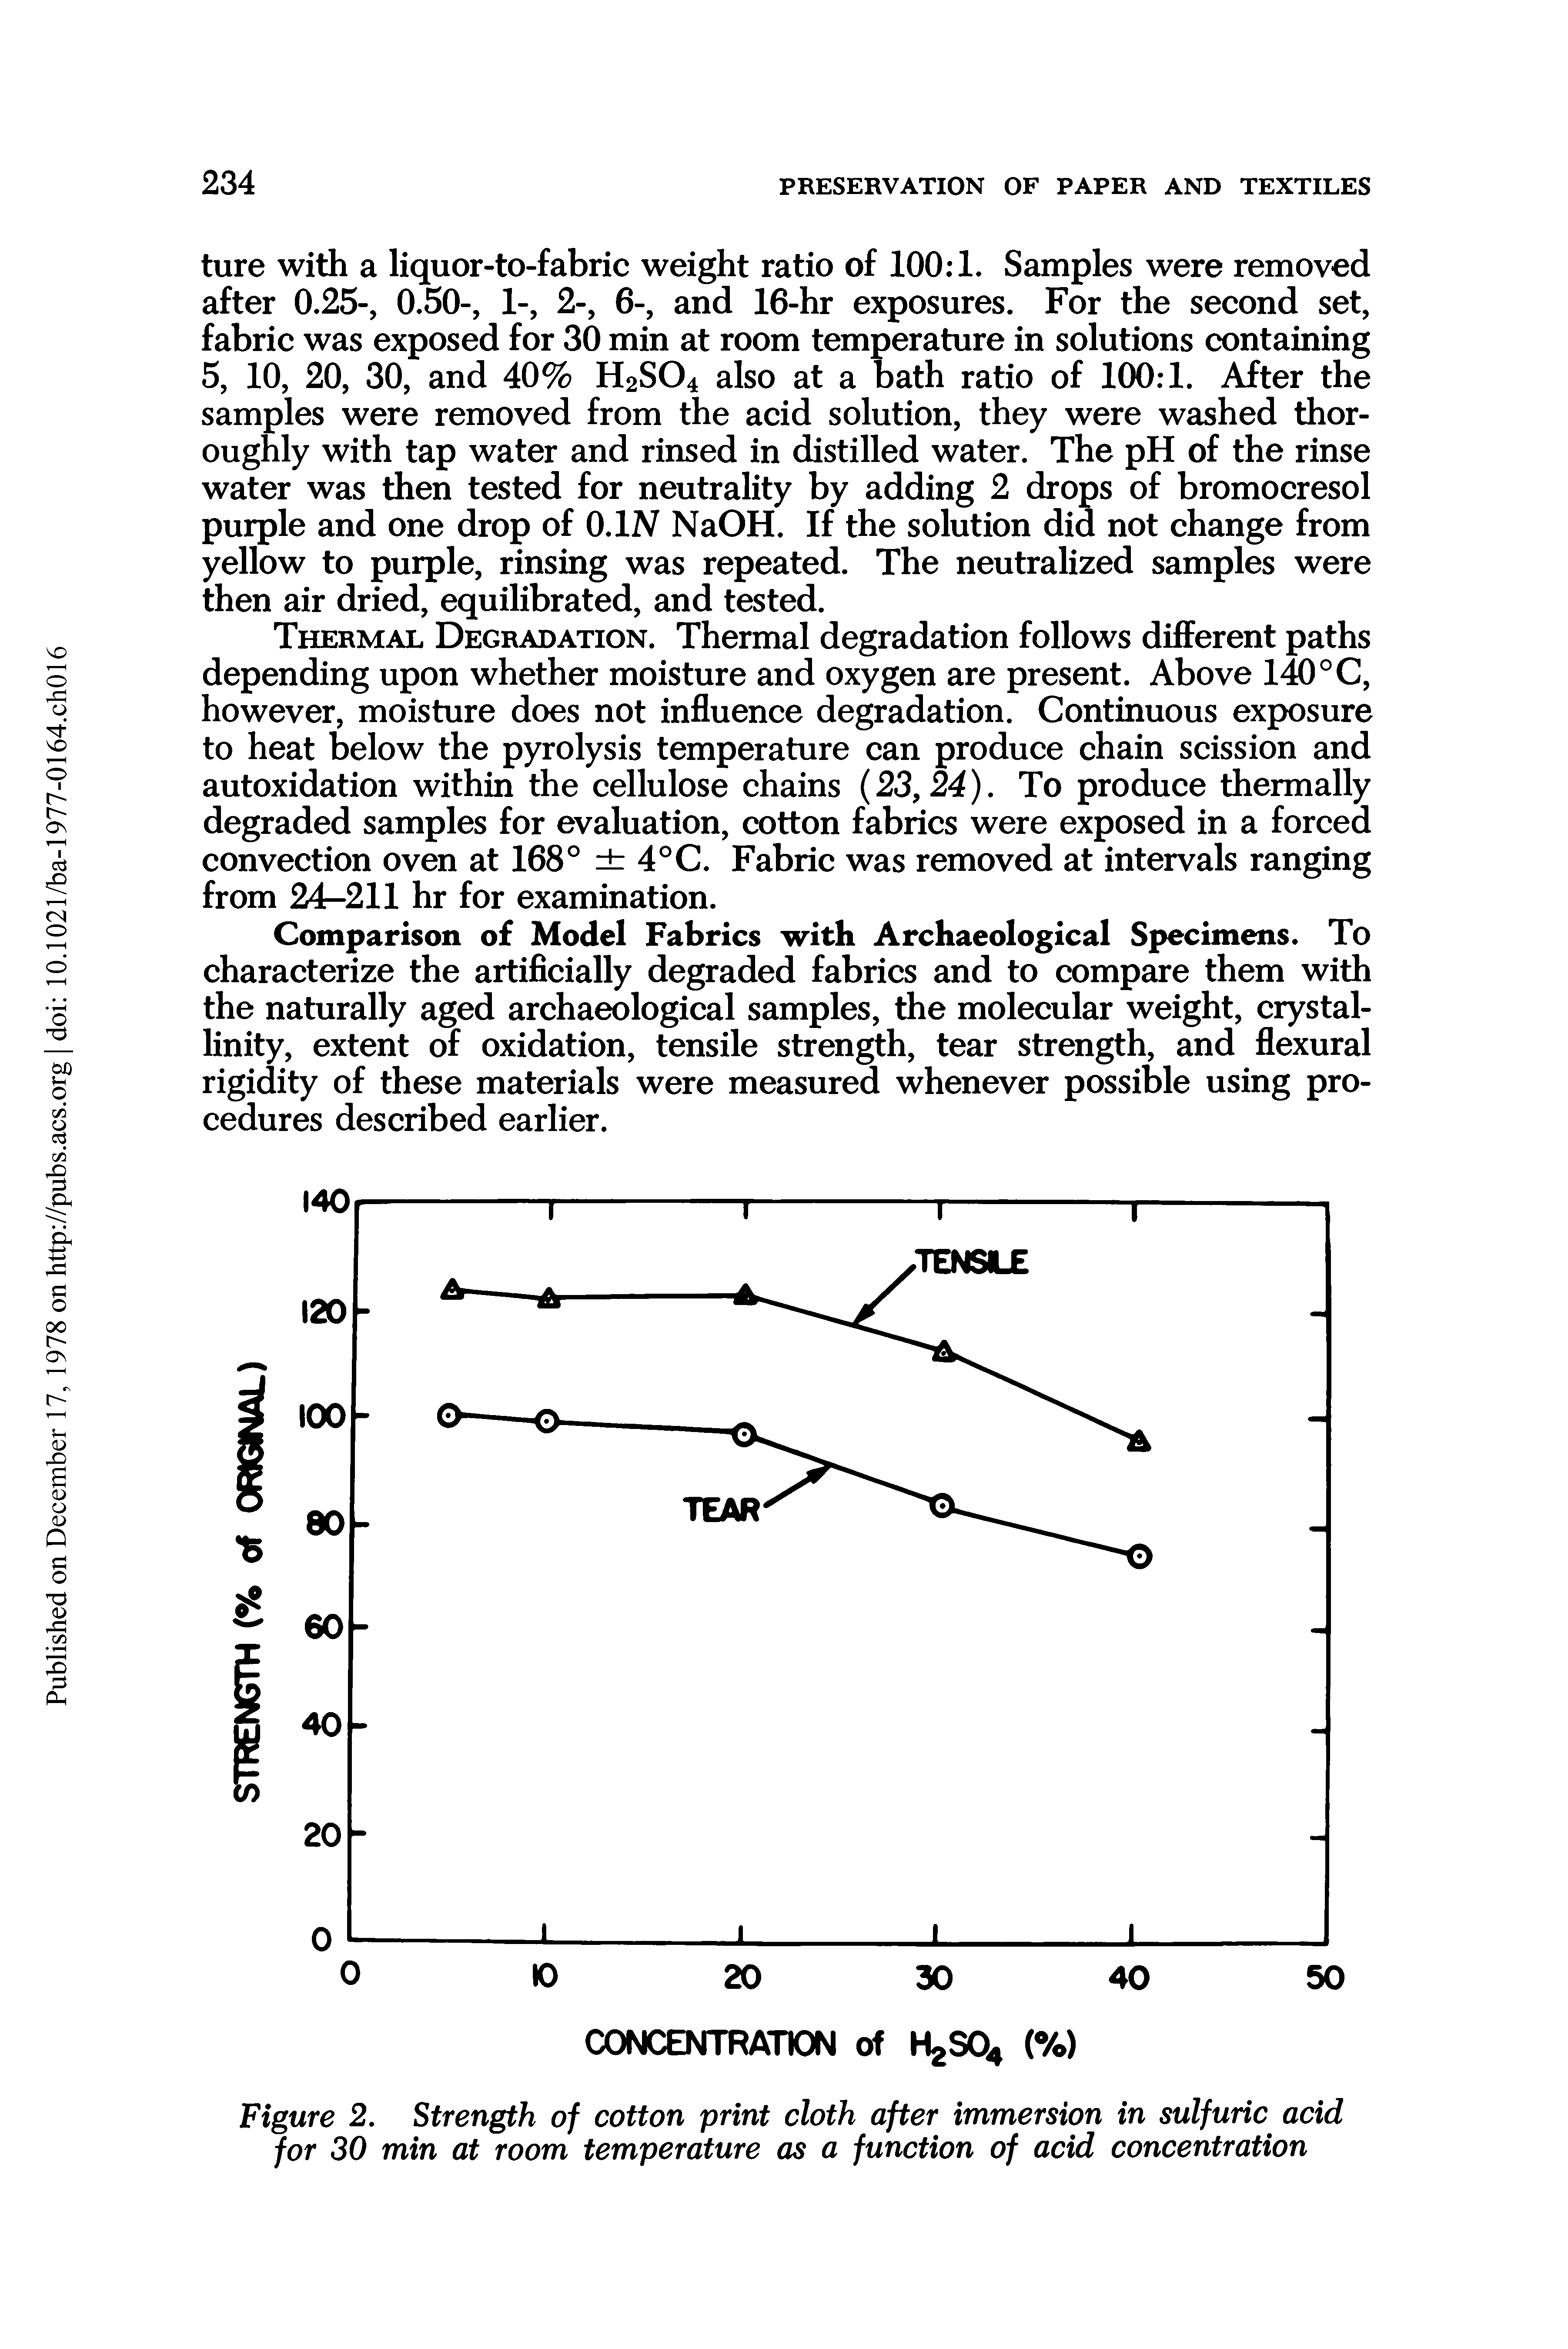 Figure 2. Strength of cotton print cloth after immersion in sulfuric acid for 30 min at room temperature as a function of acid concentration...